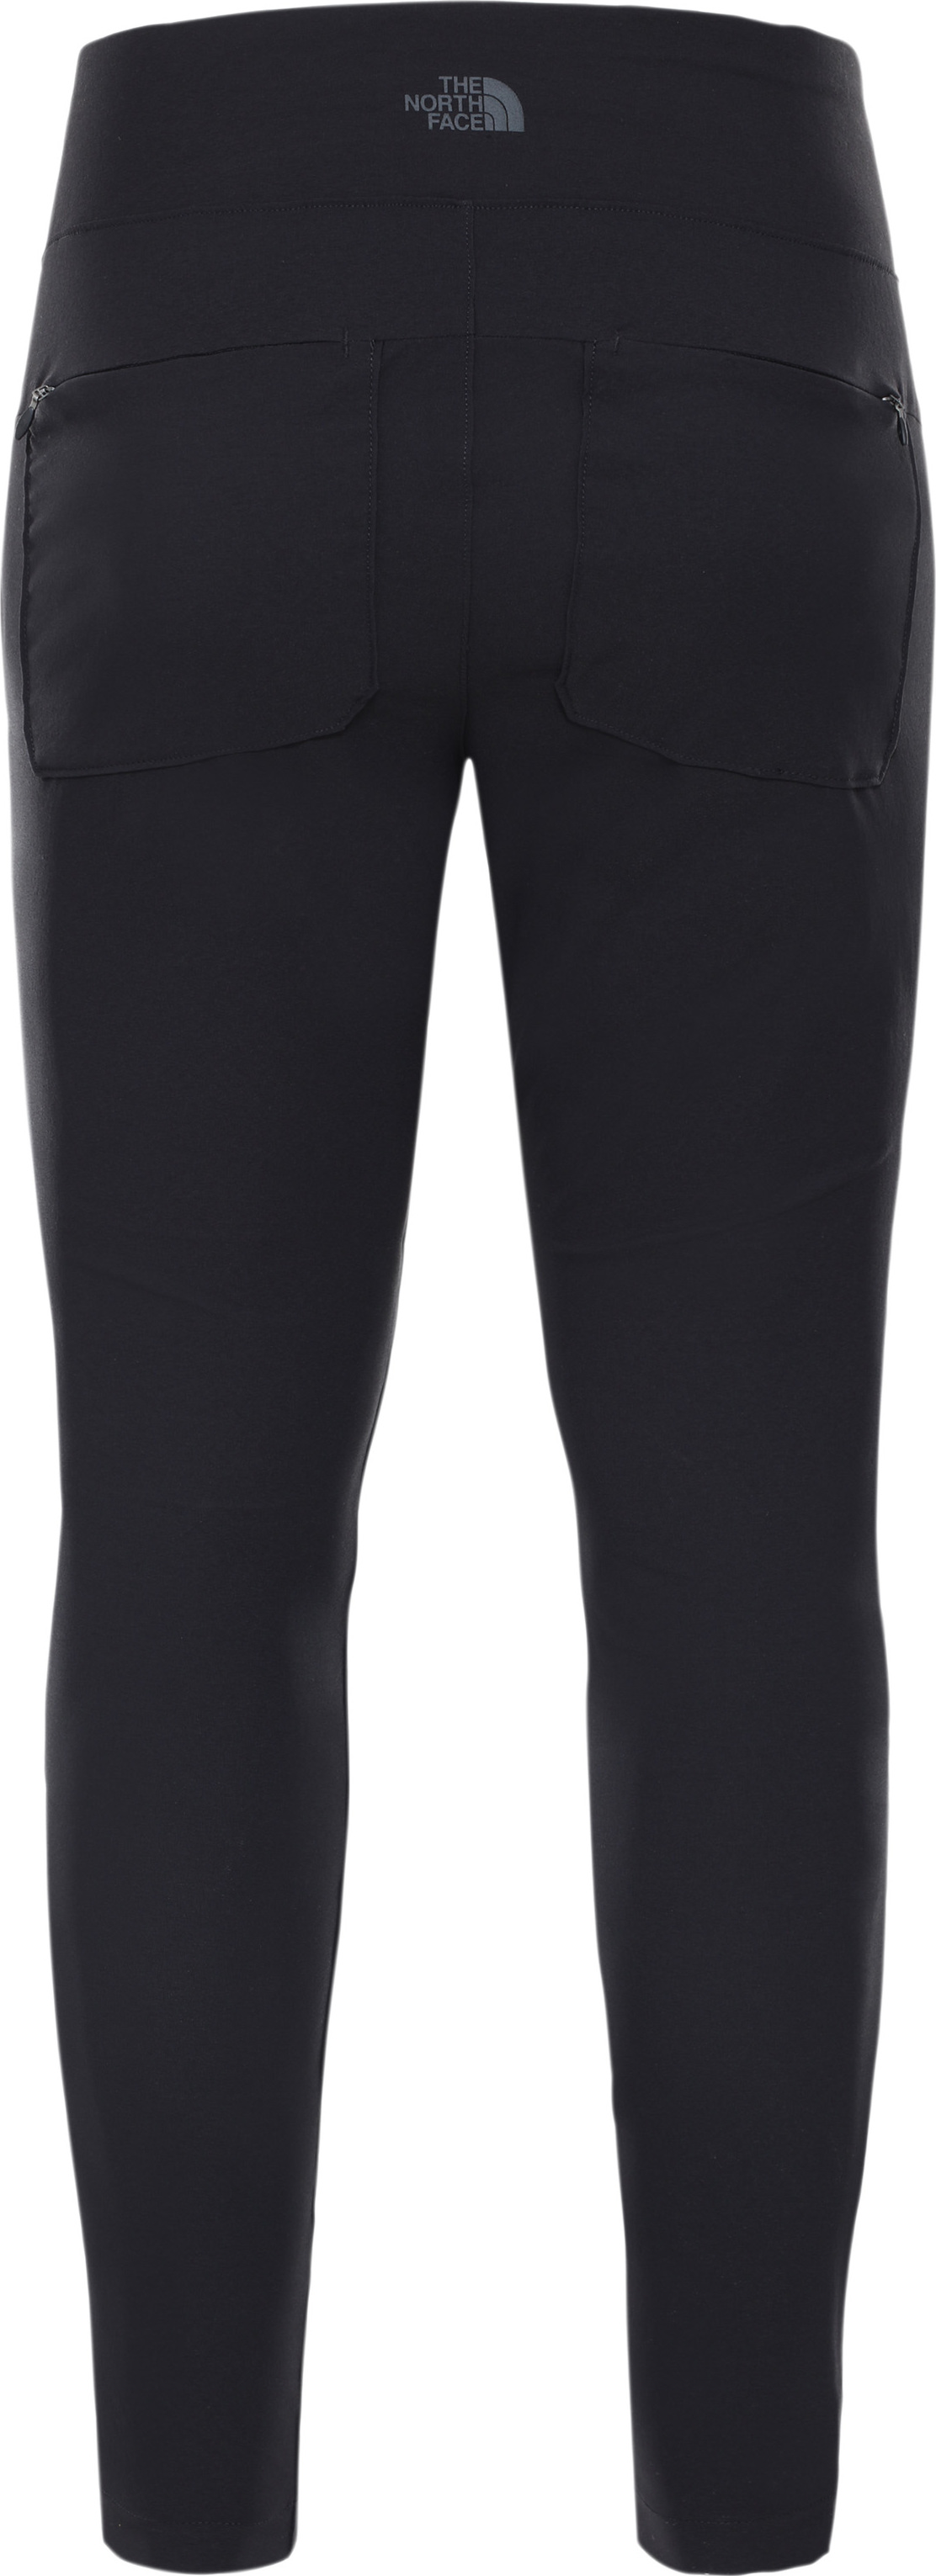  THE NORTH FACE Women's Paramount Hybrid High Rise Tight,  Asphalt Grey, X-Small : Clothing, Shoes & Jewelry